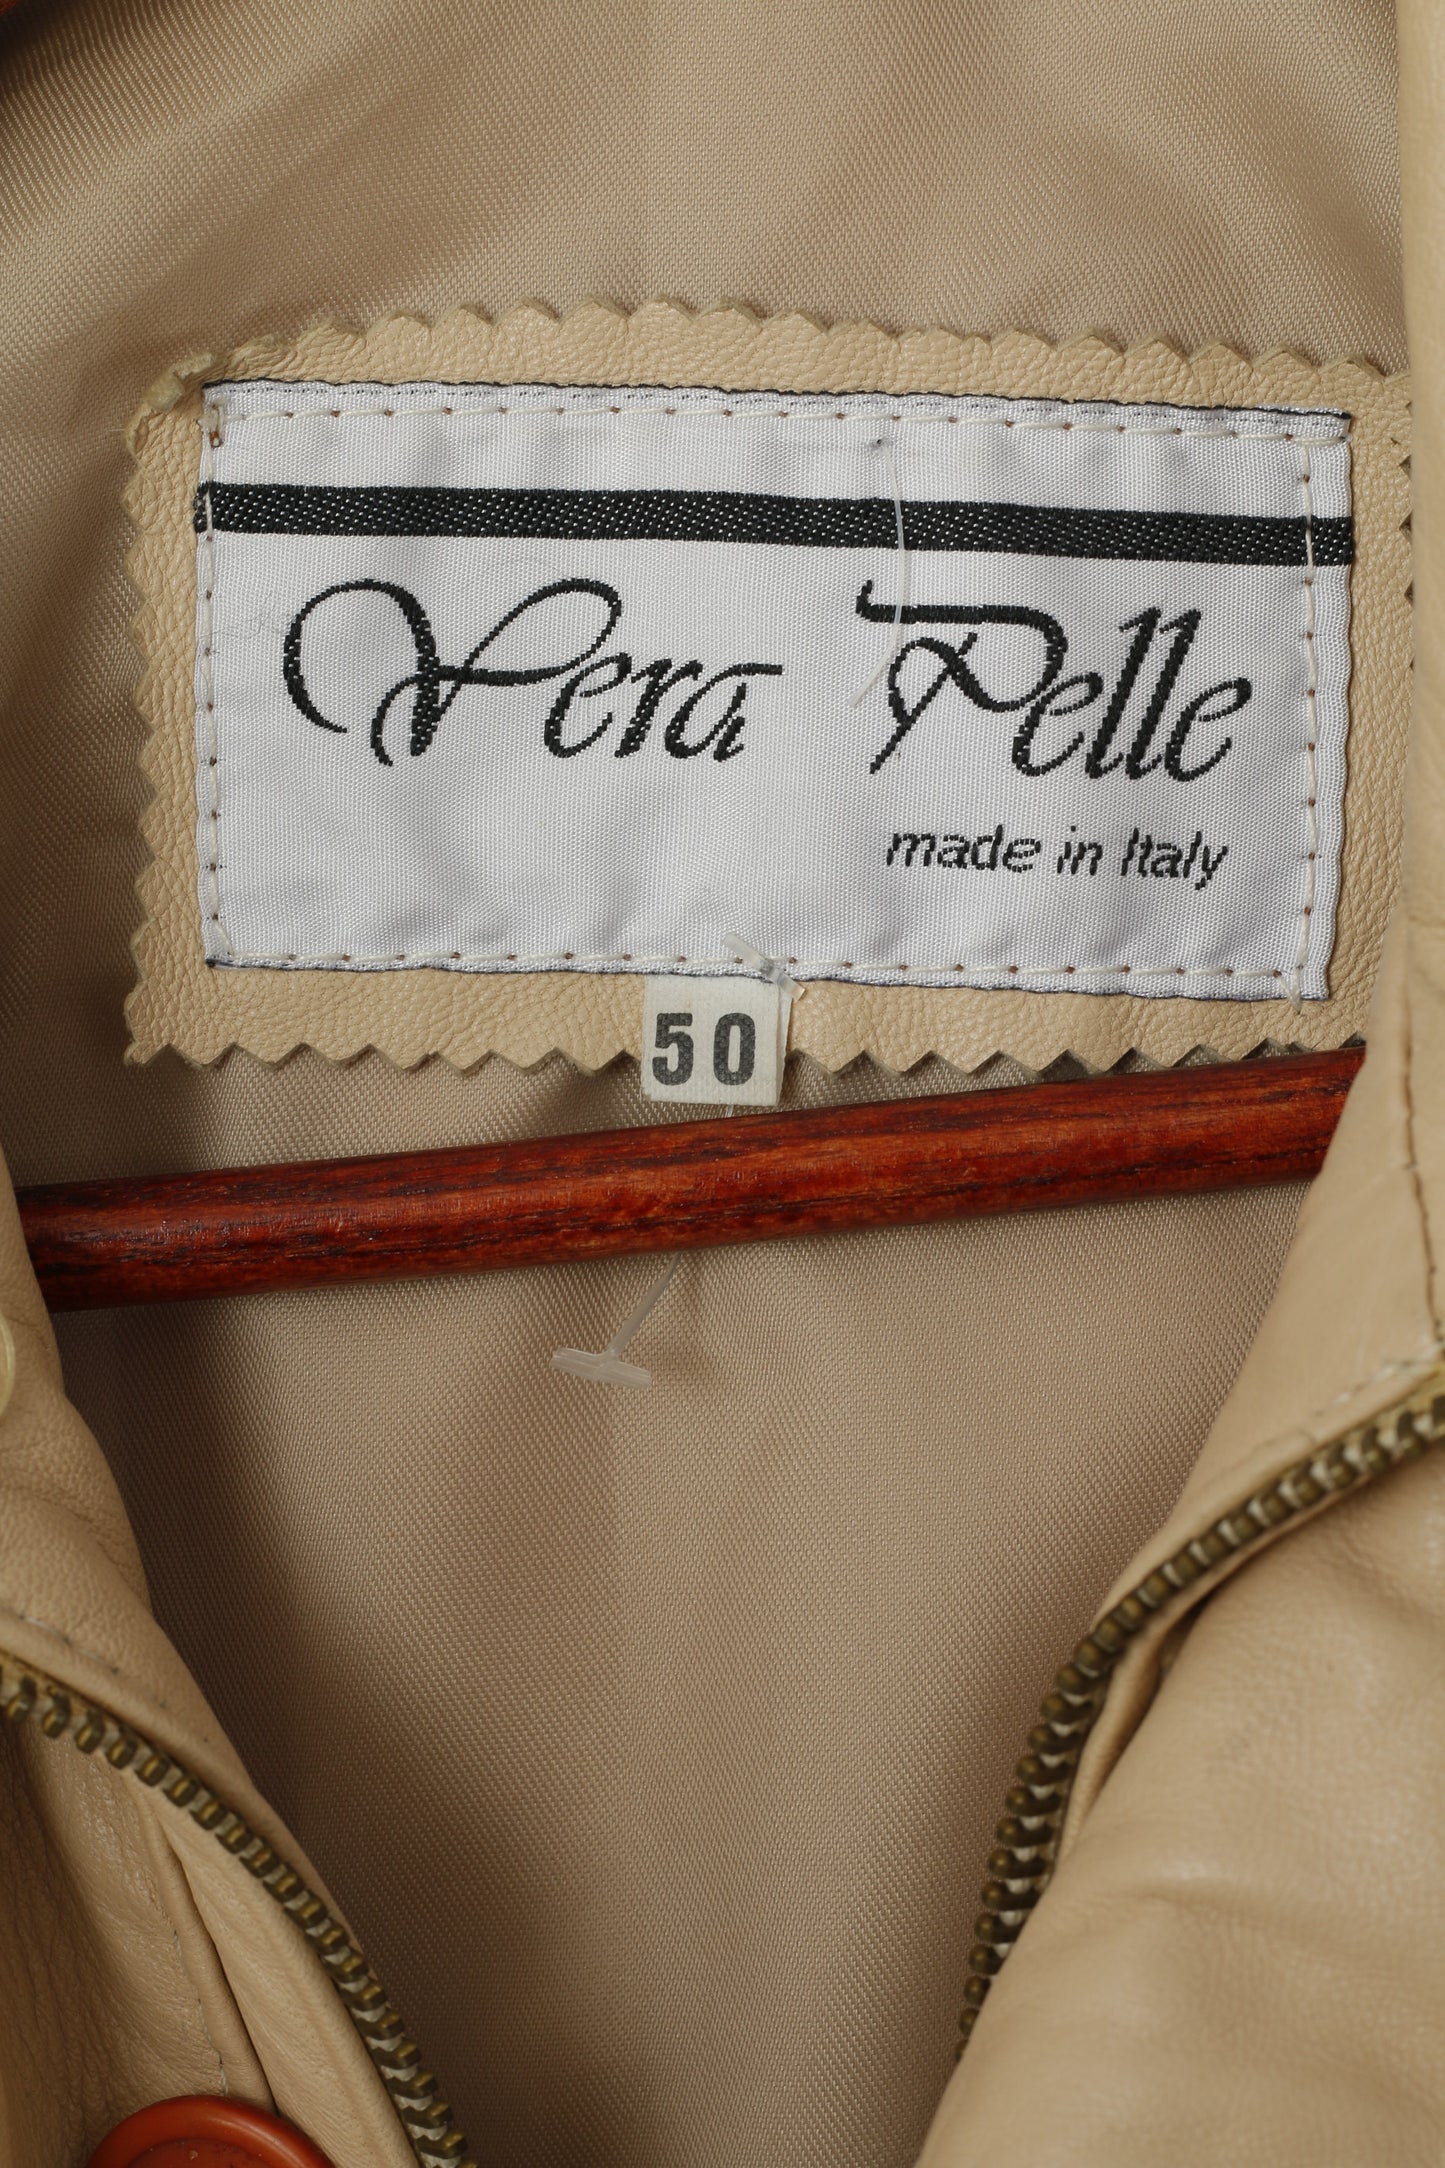 Giacca in Pelle Vintage Uomo 50 M Bomber Beige Tasche Vera Pelle Made in Italy Top